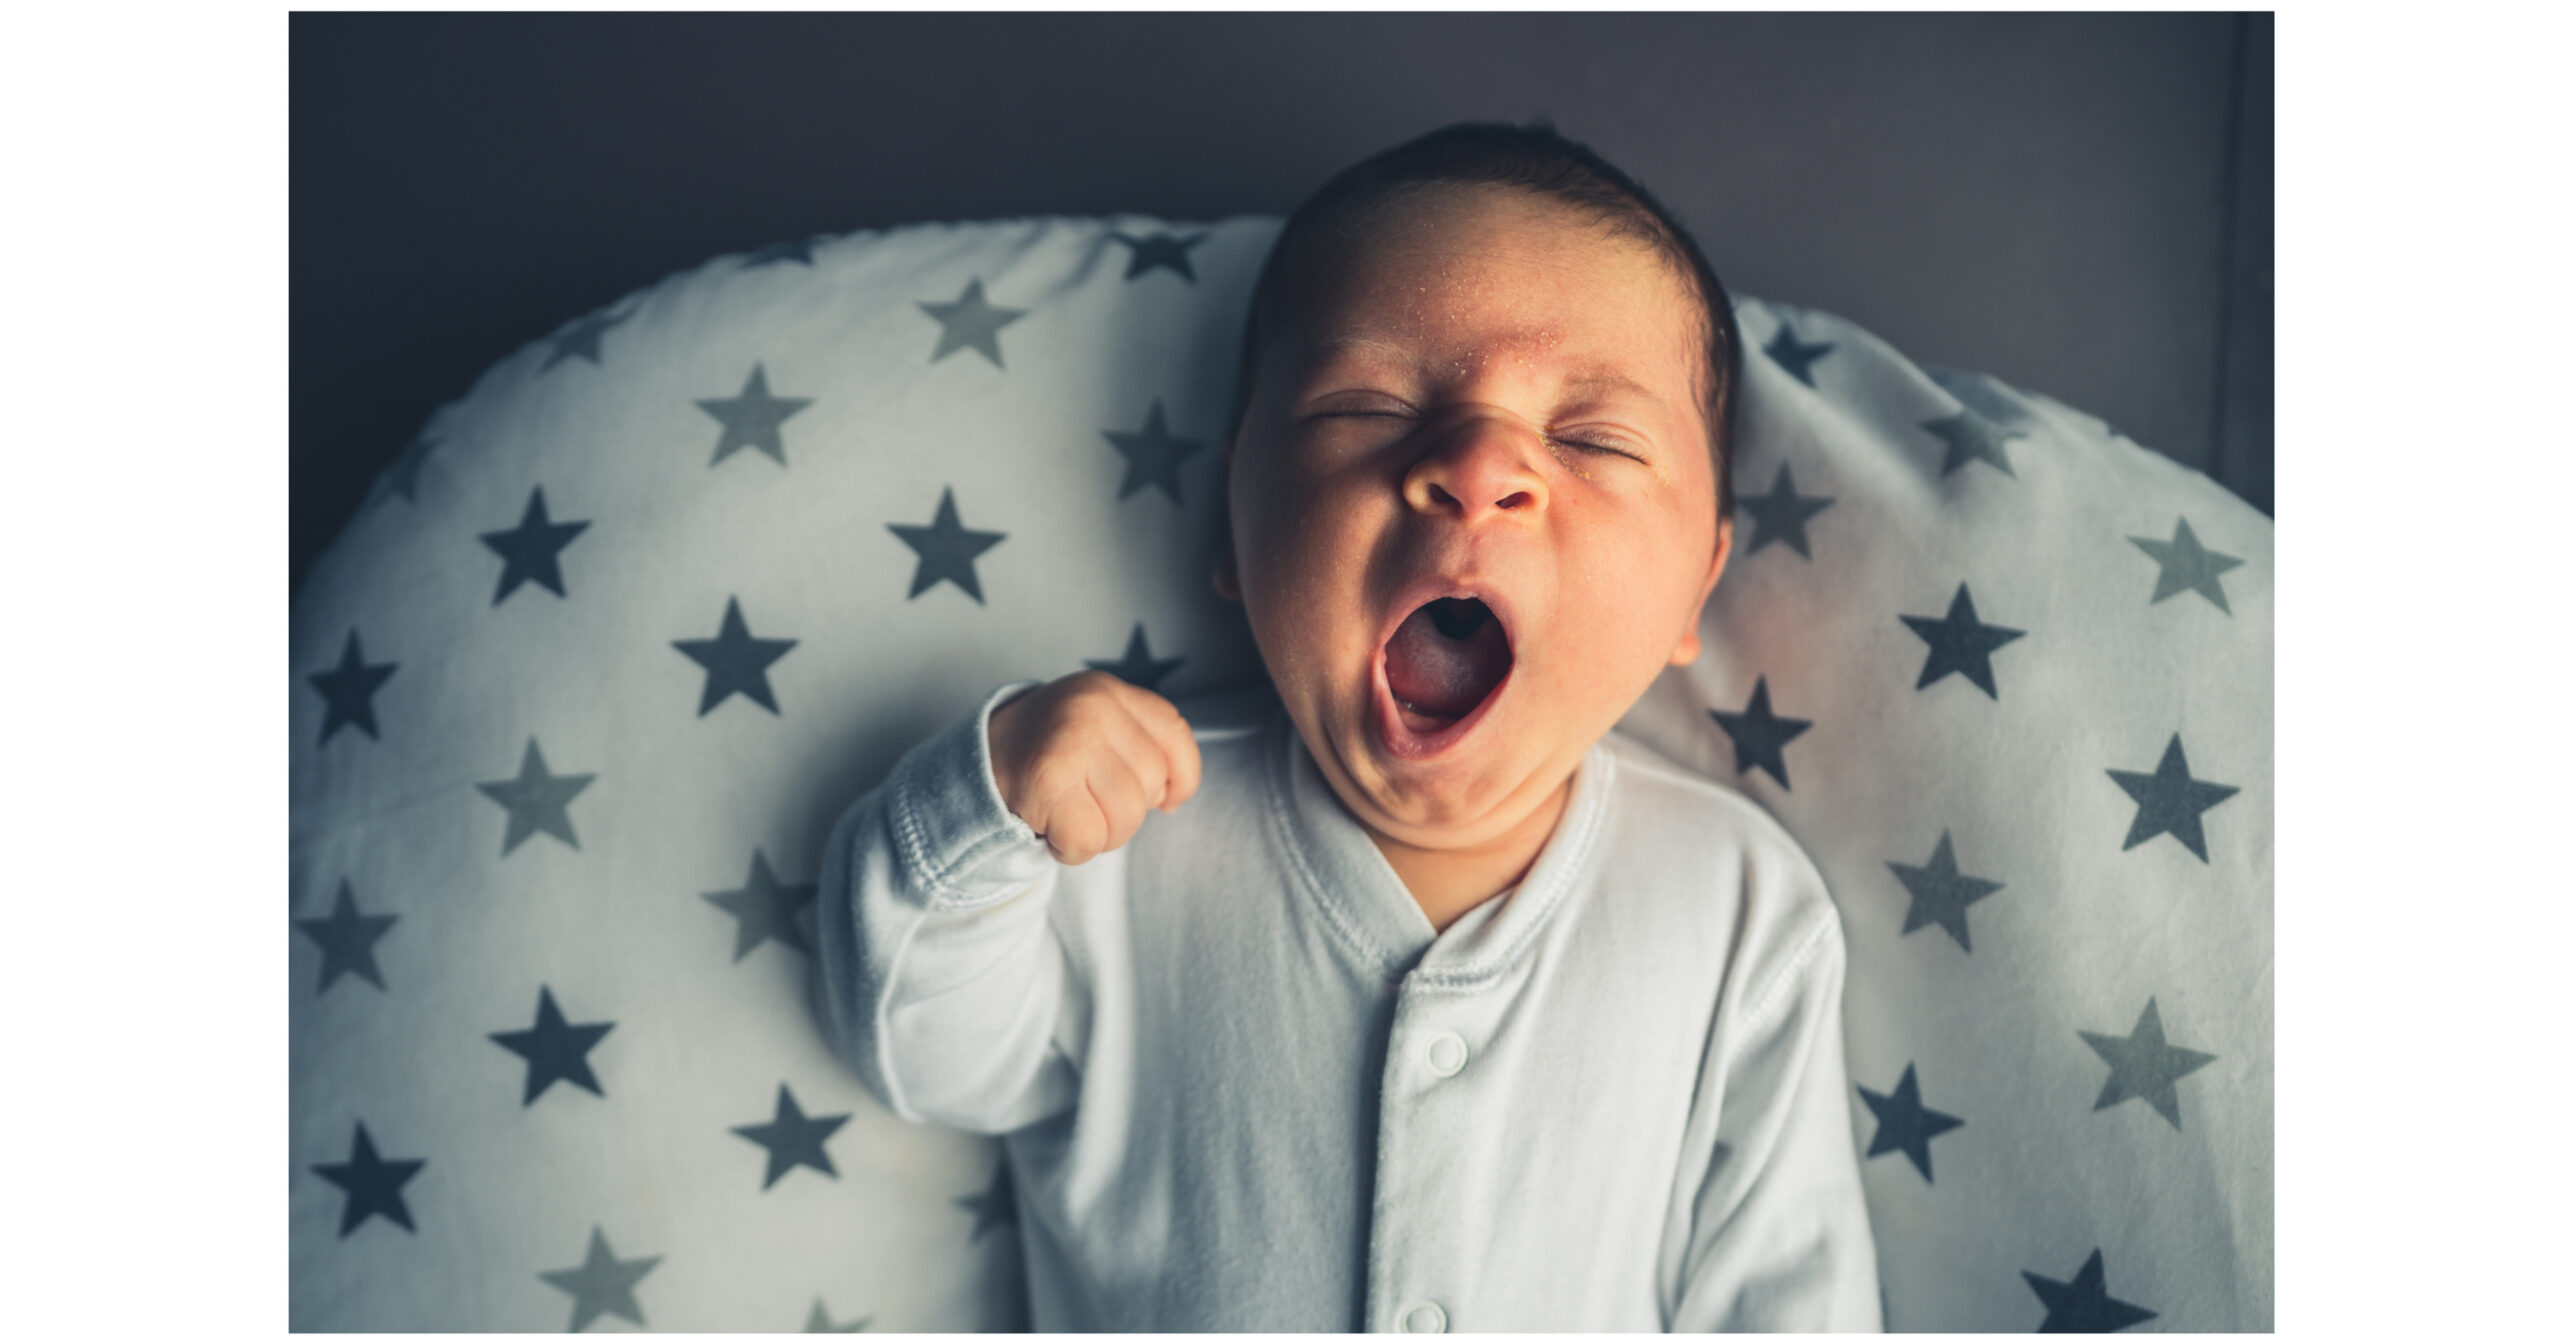 unsafe sleep setuo - baby with a huge yawn laying on a star patterned nursing pillow